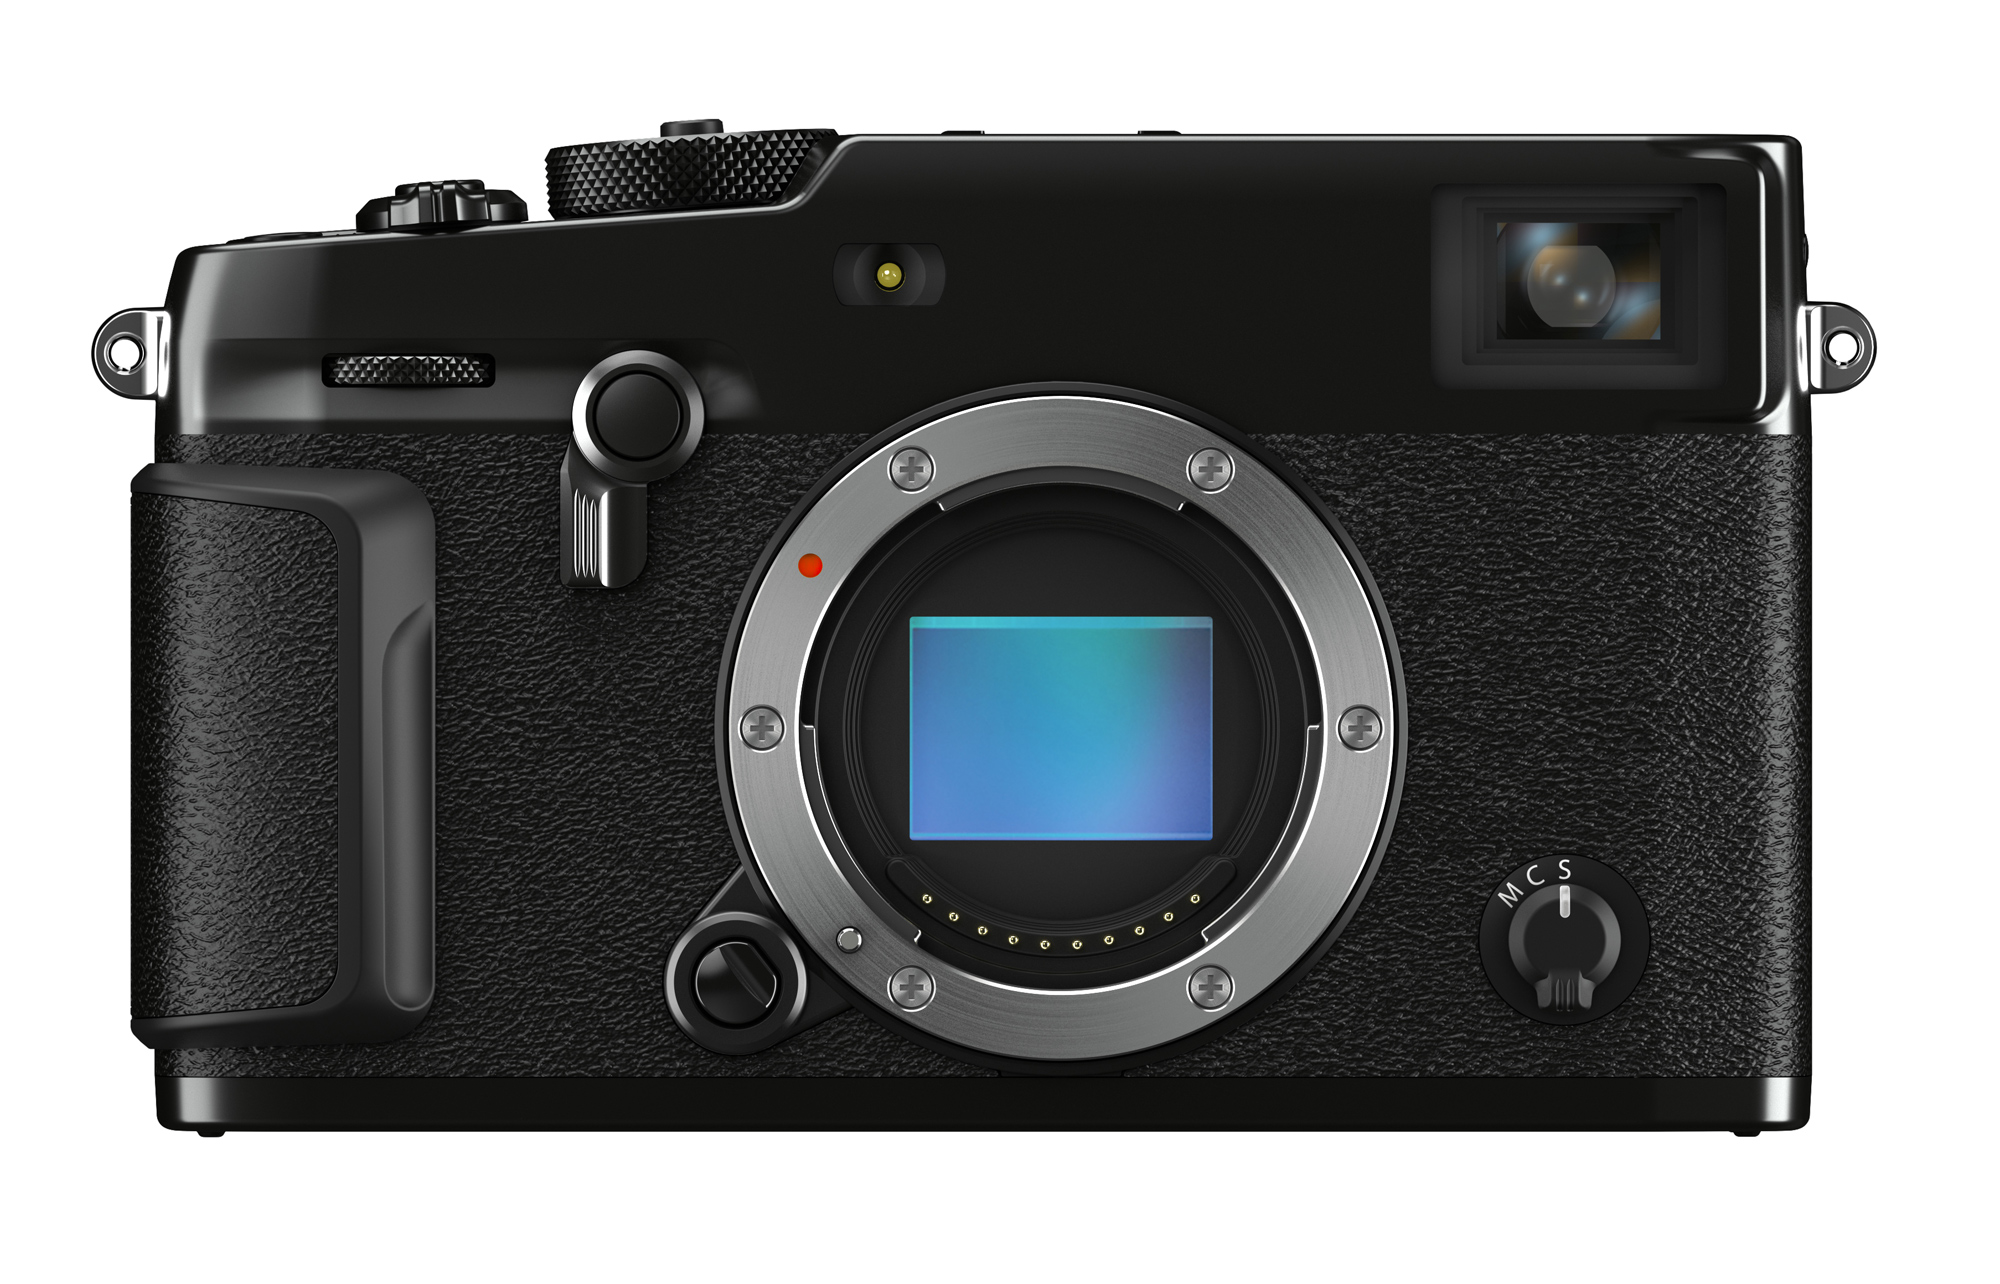 Frontal view of the X-Pro3